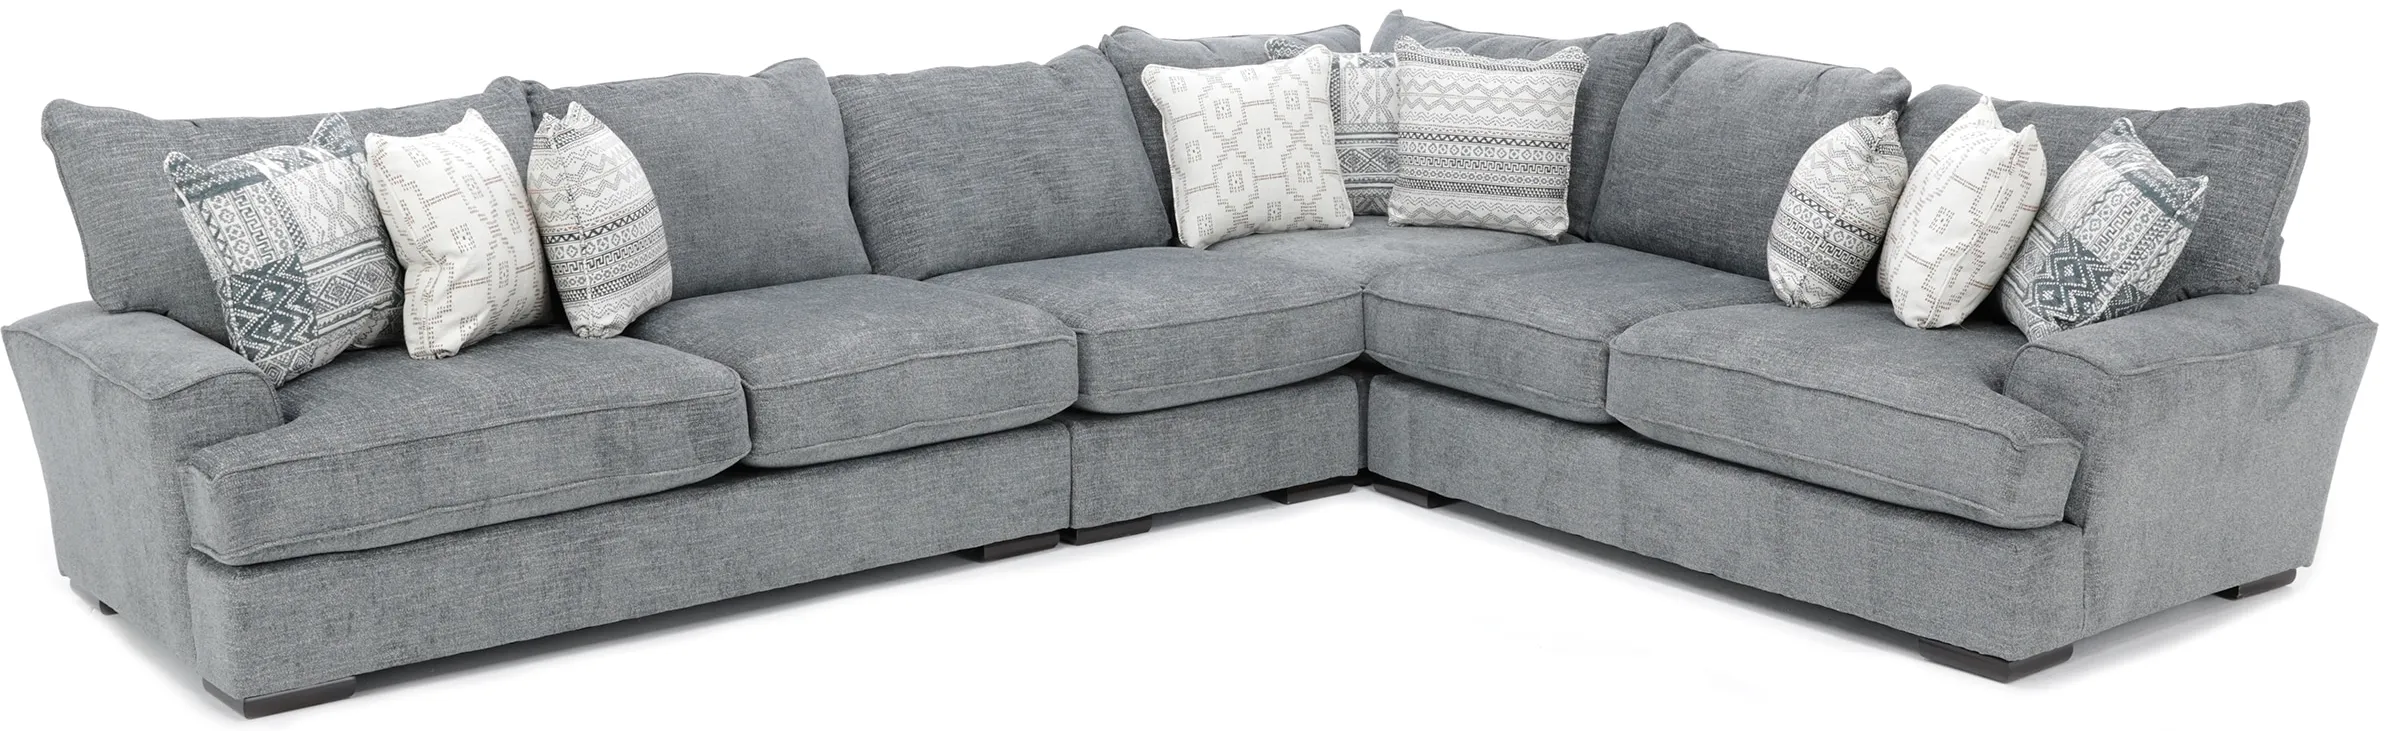 Tribecca 4-Pc. Sectional